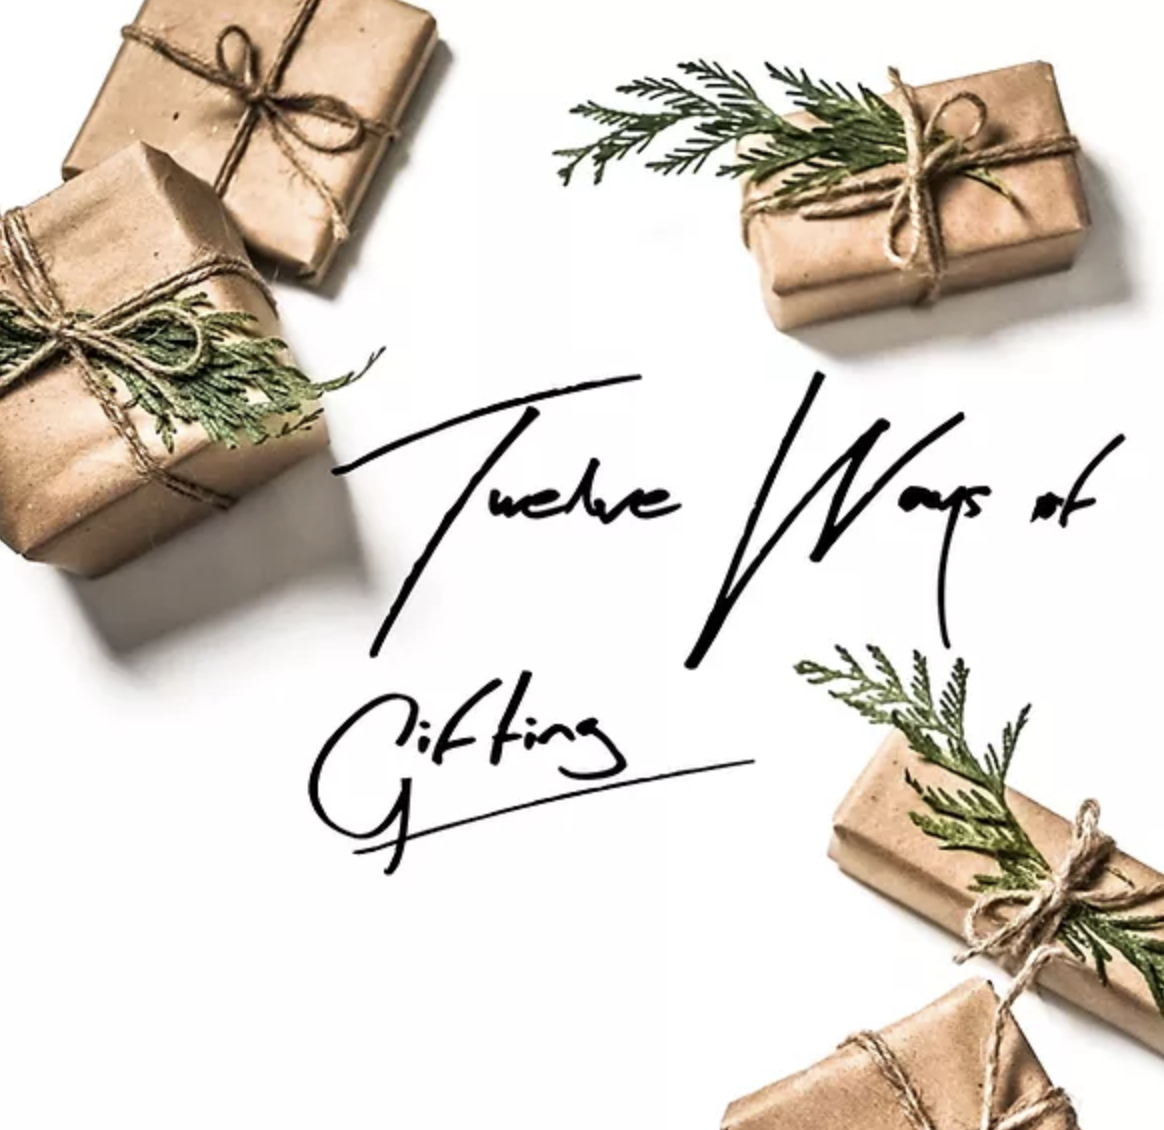 Explore corporate gifting tips with the twelve ways of gifting.